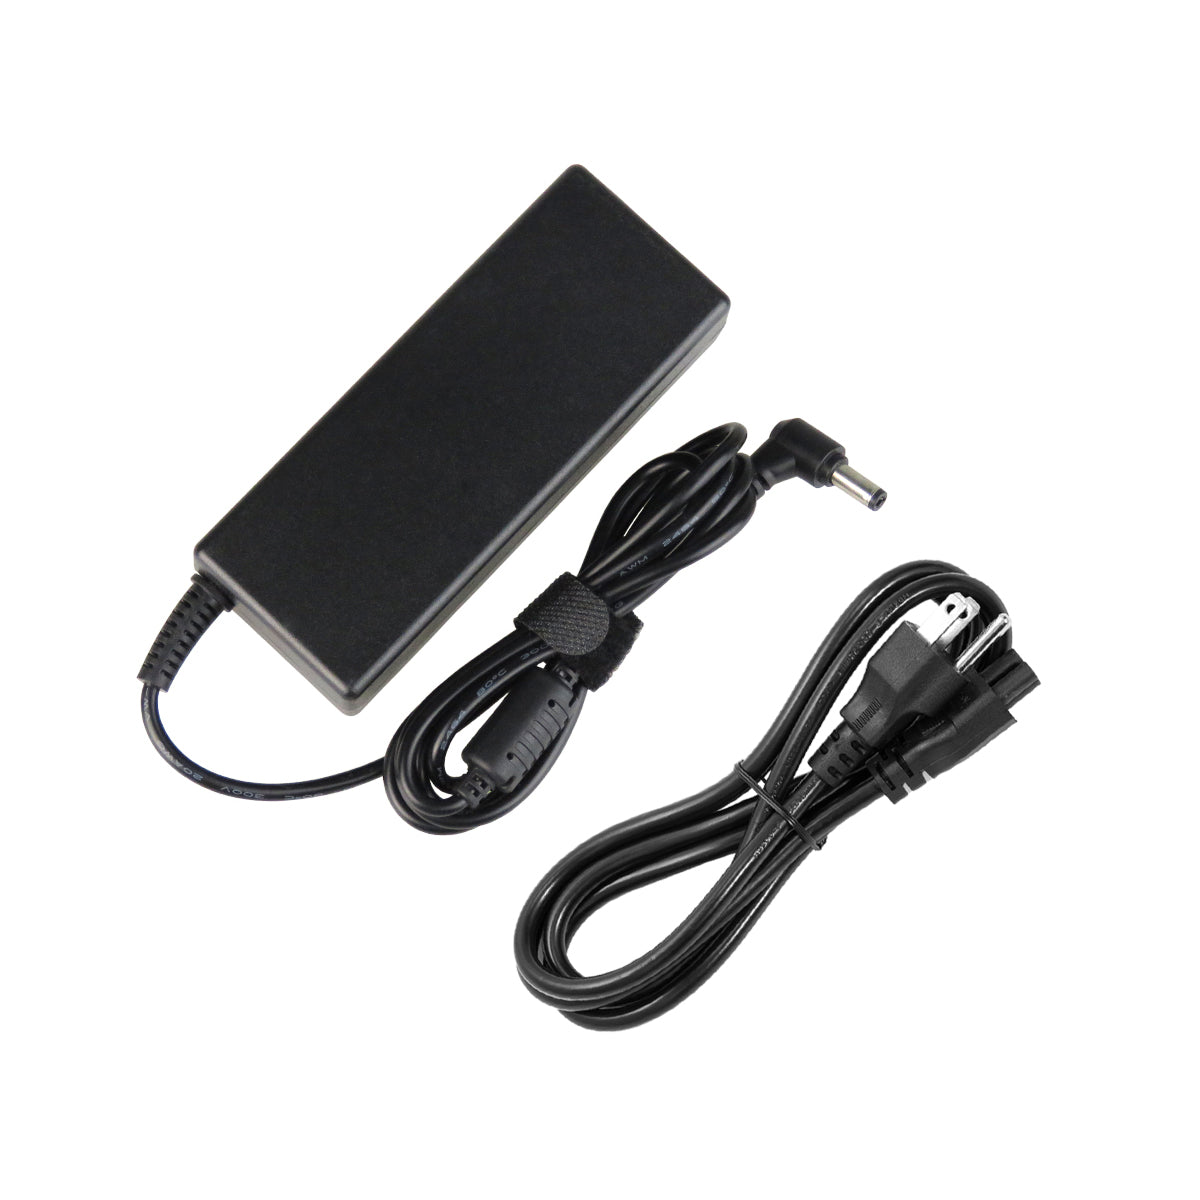 AC Adapter Charger for ASUS F7KR Notebook.